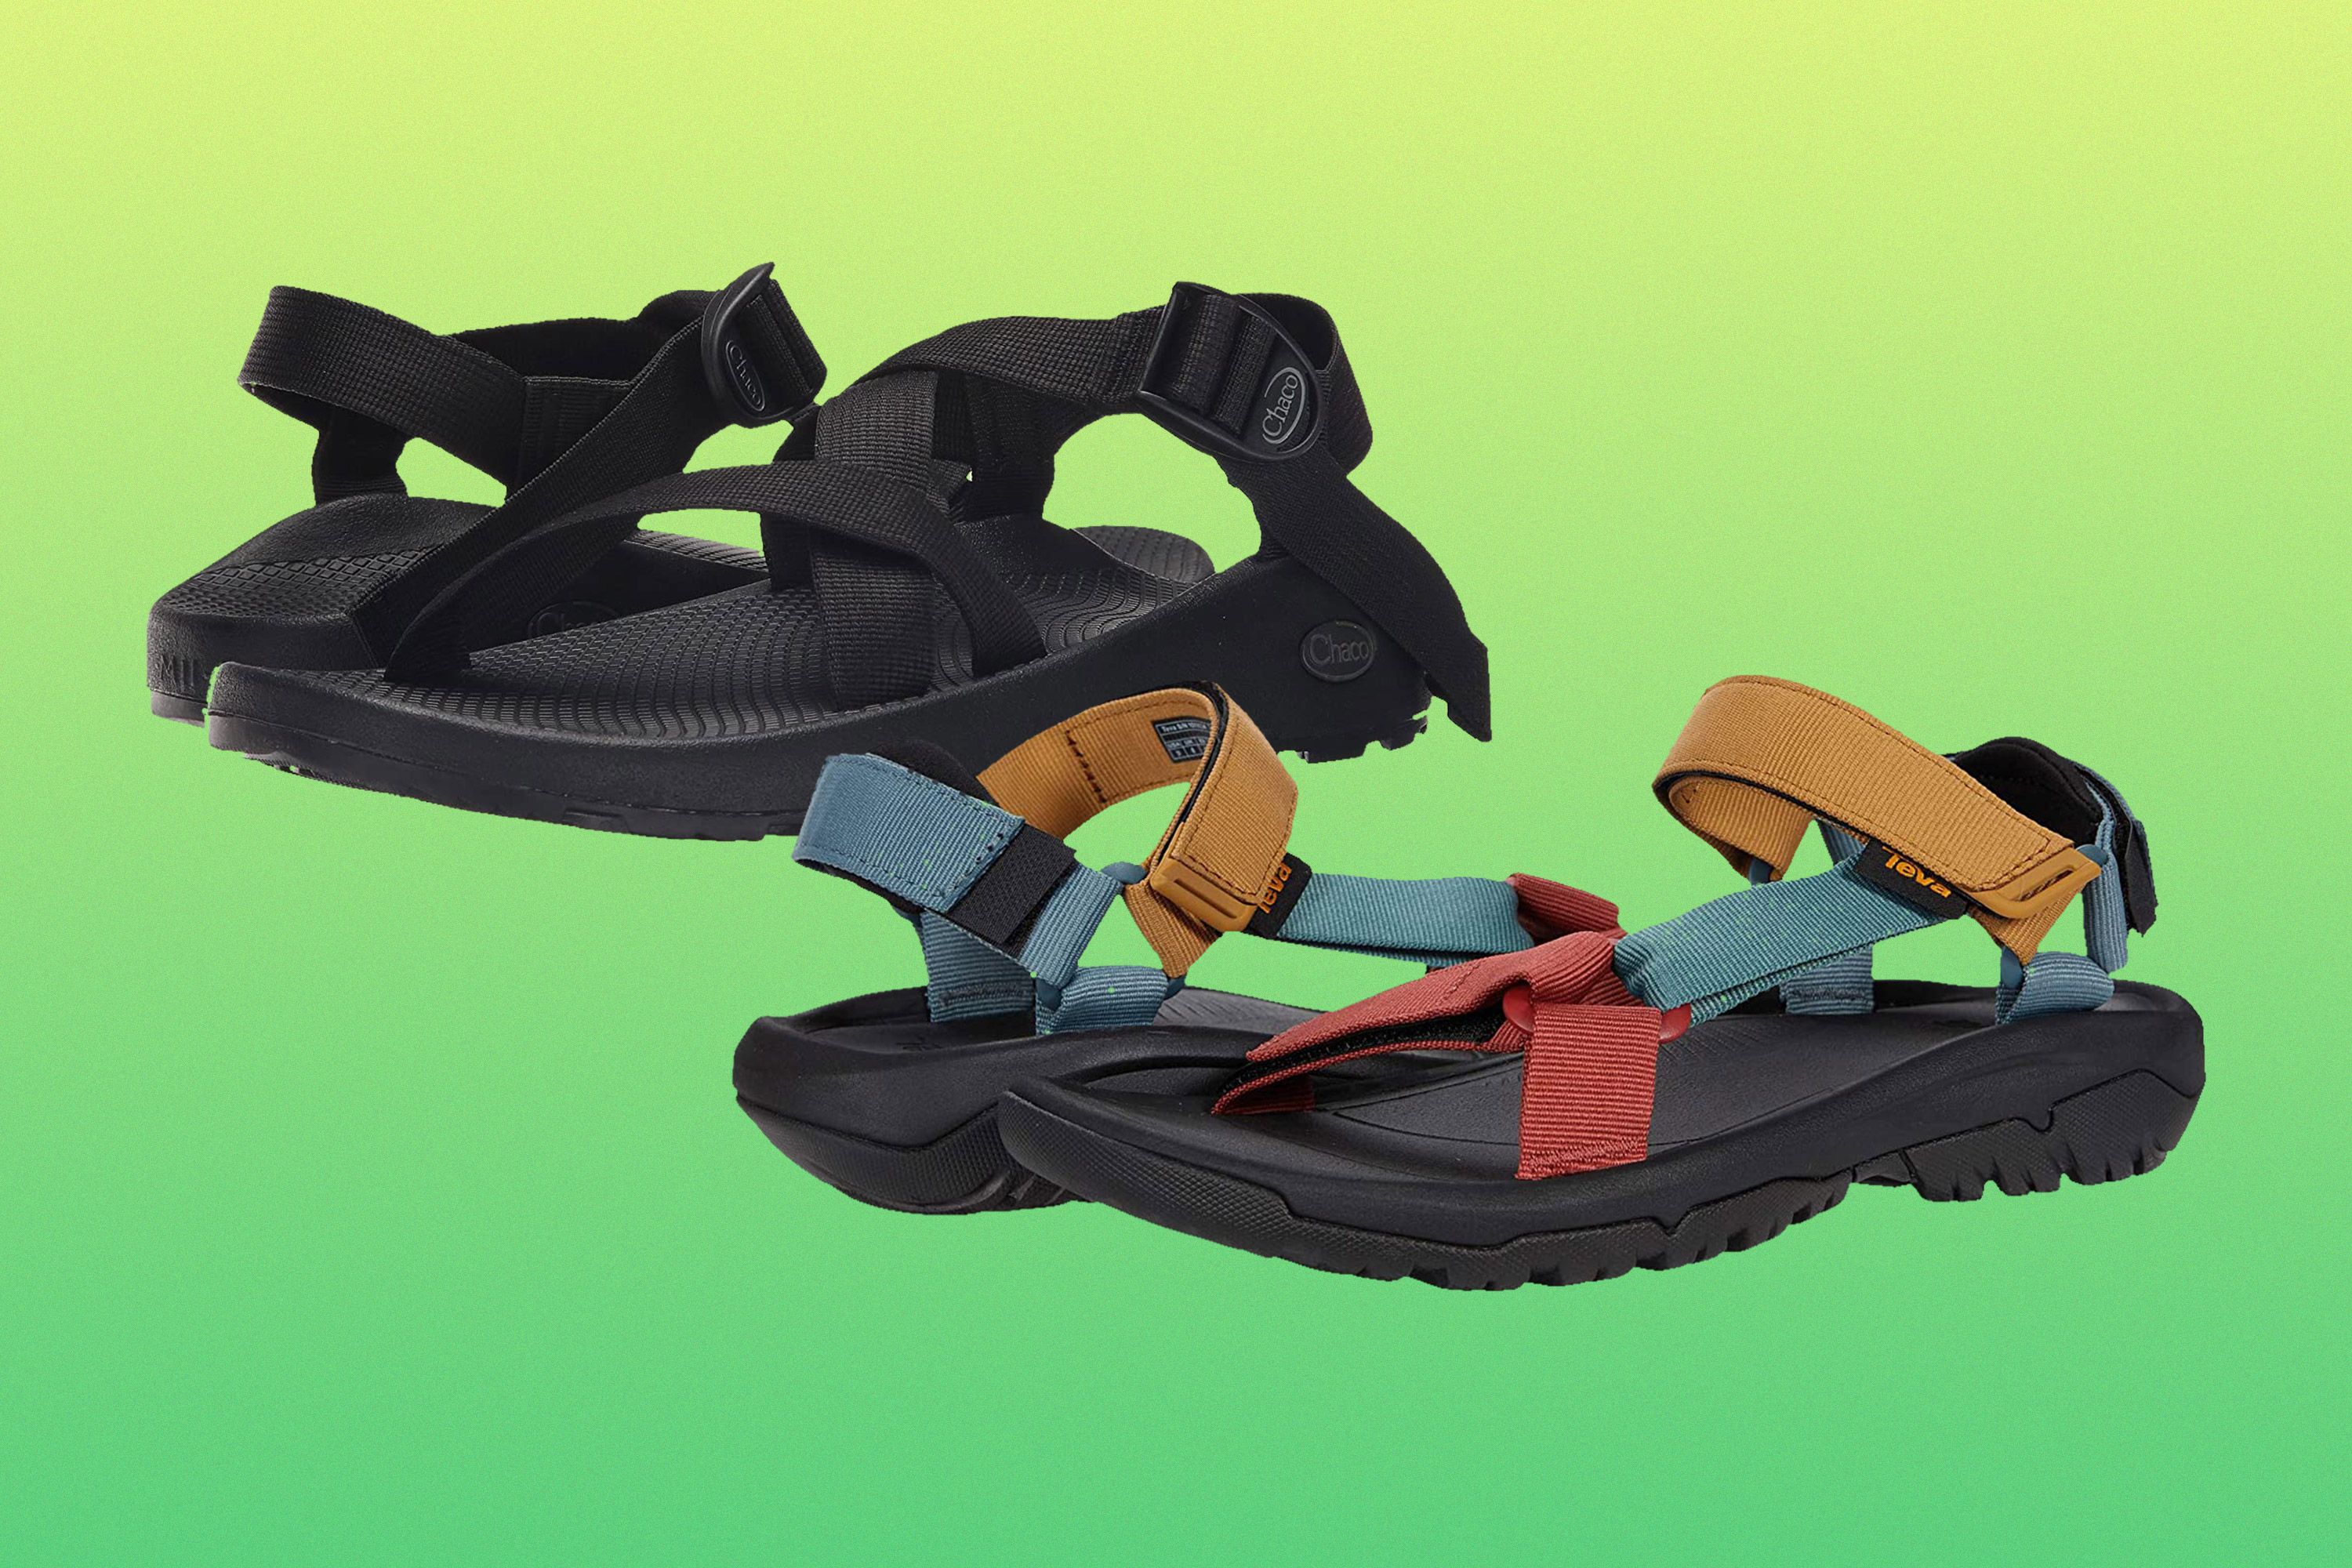 Chaco Teva: Which Sandals Should Buy?